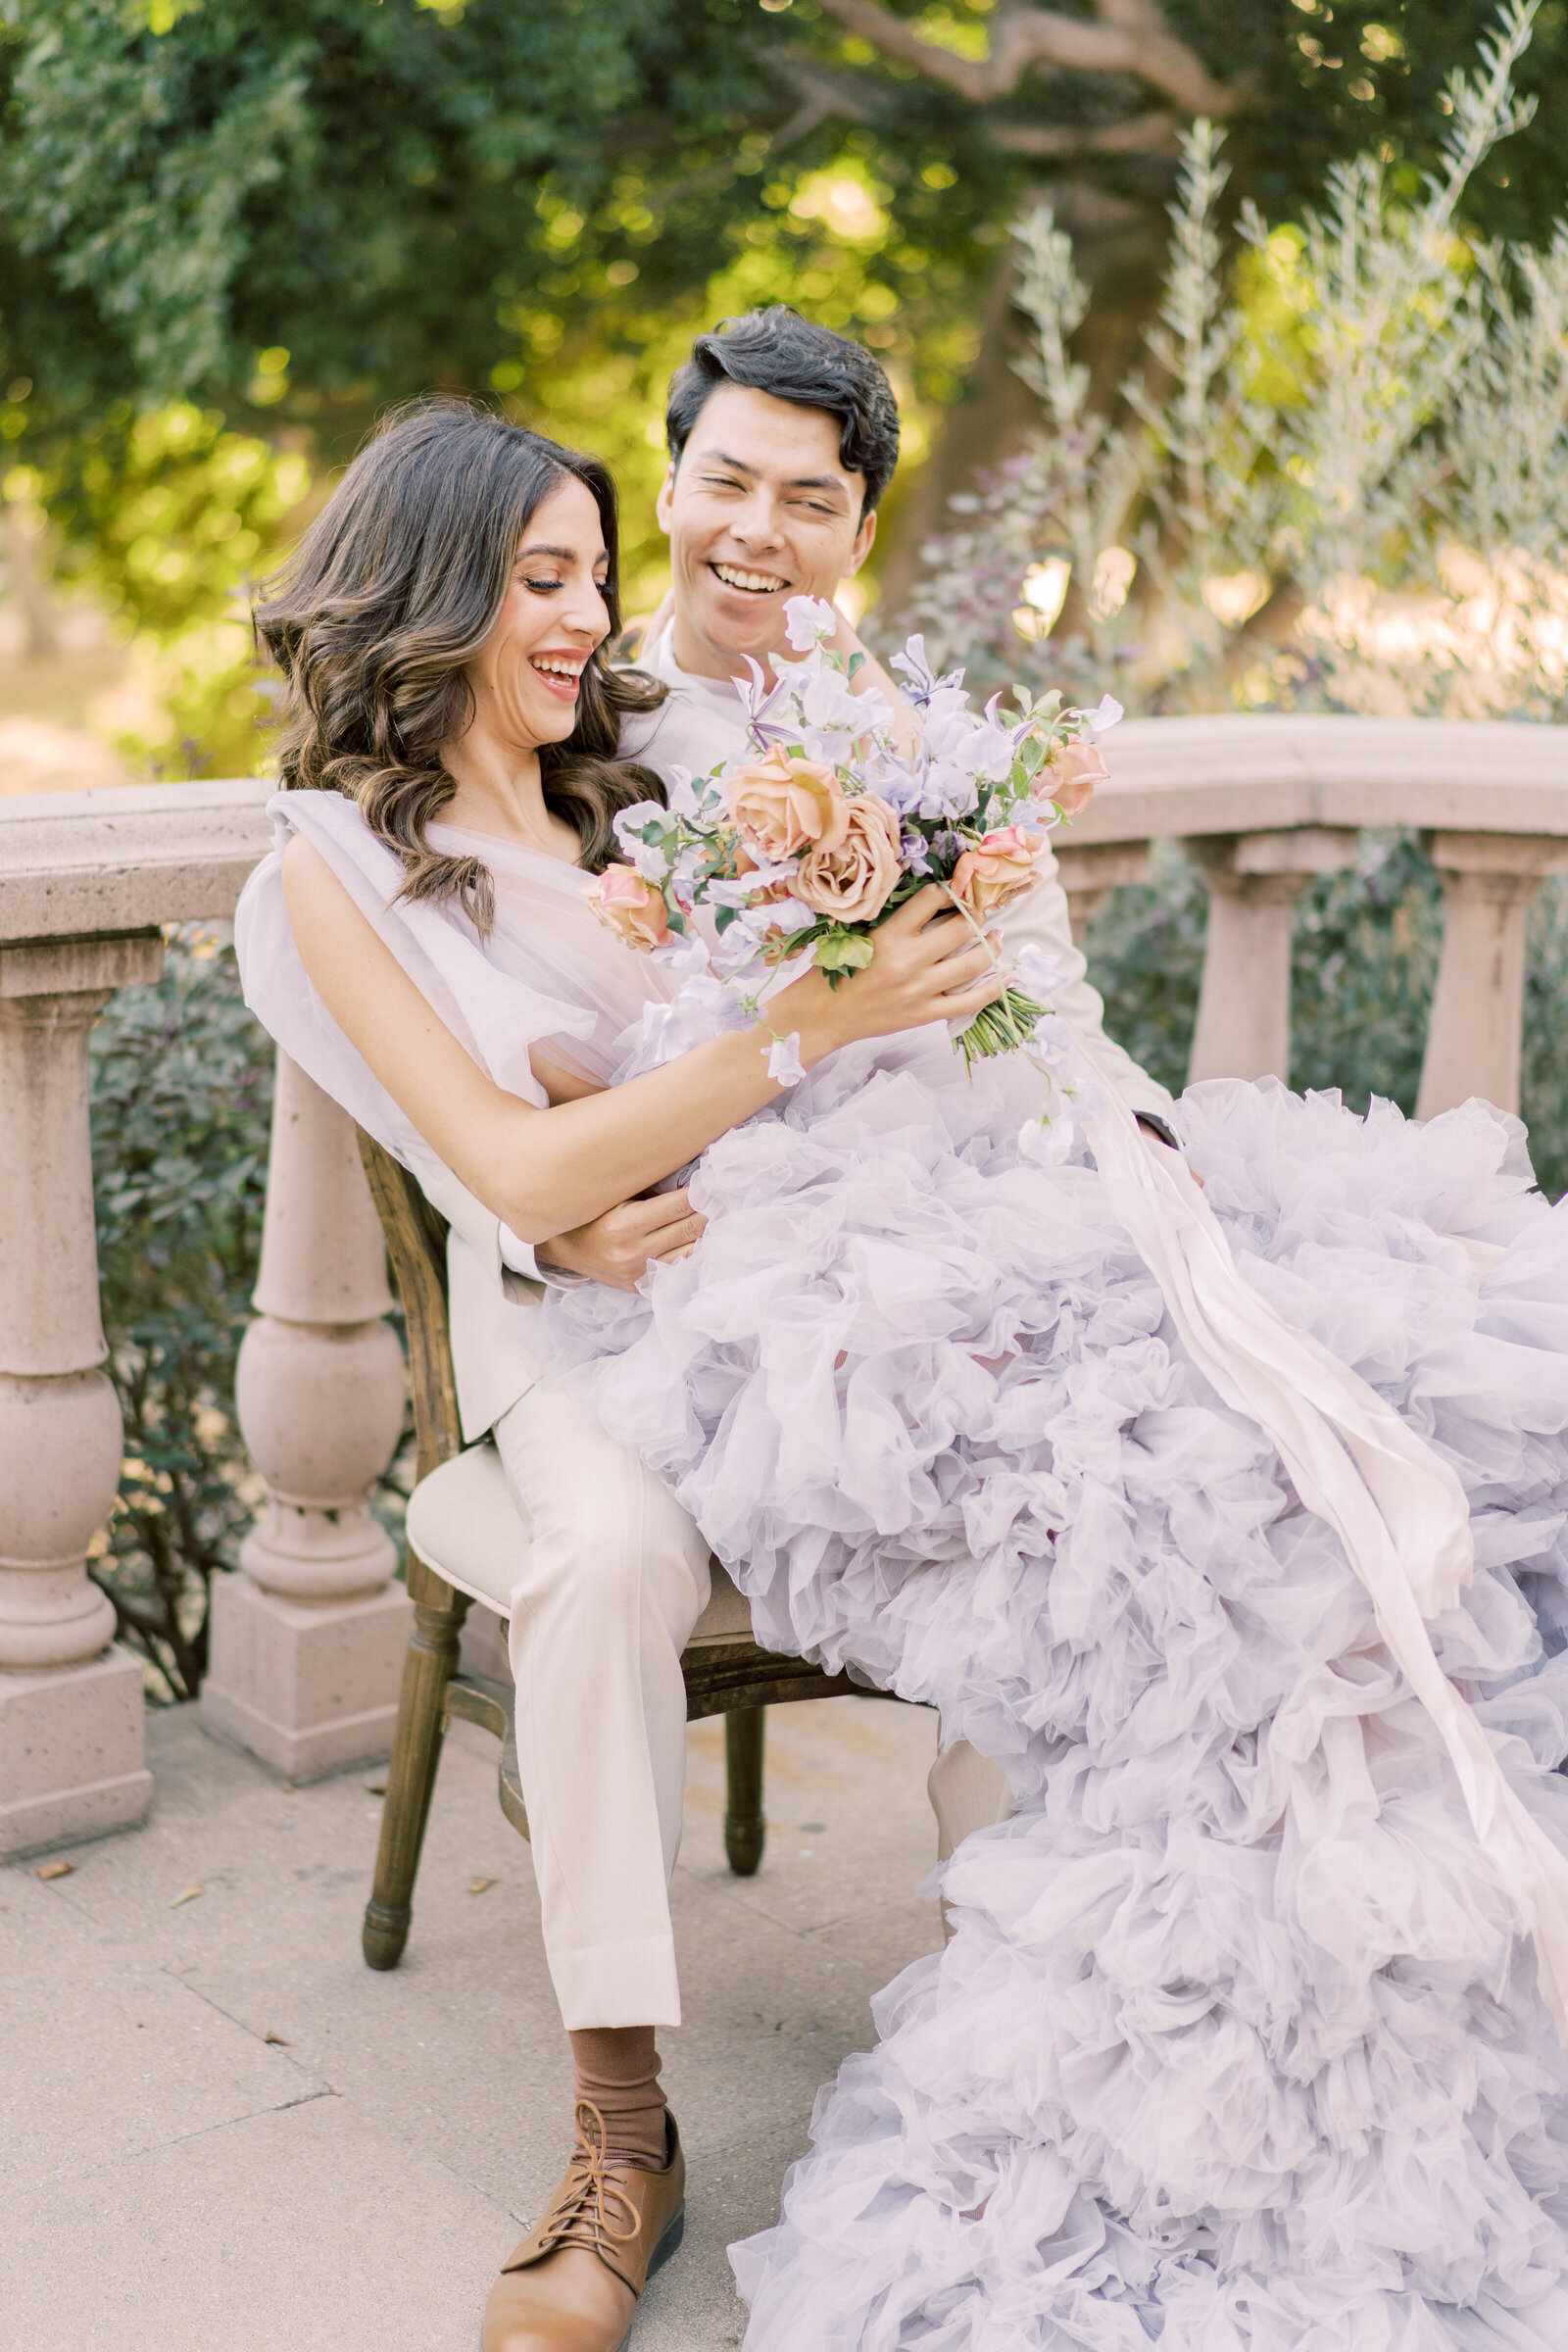 Portrait of bride and groom in a lavender gown and cream suit sitting on a chair outdoors with a bouquet.